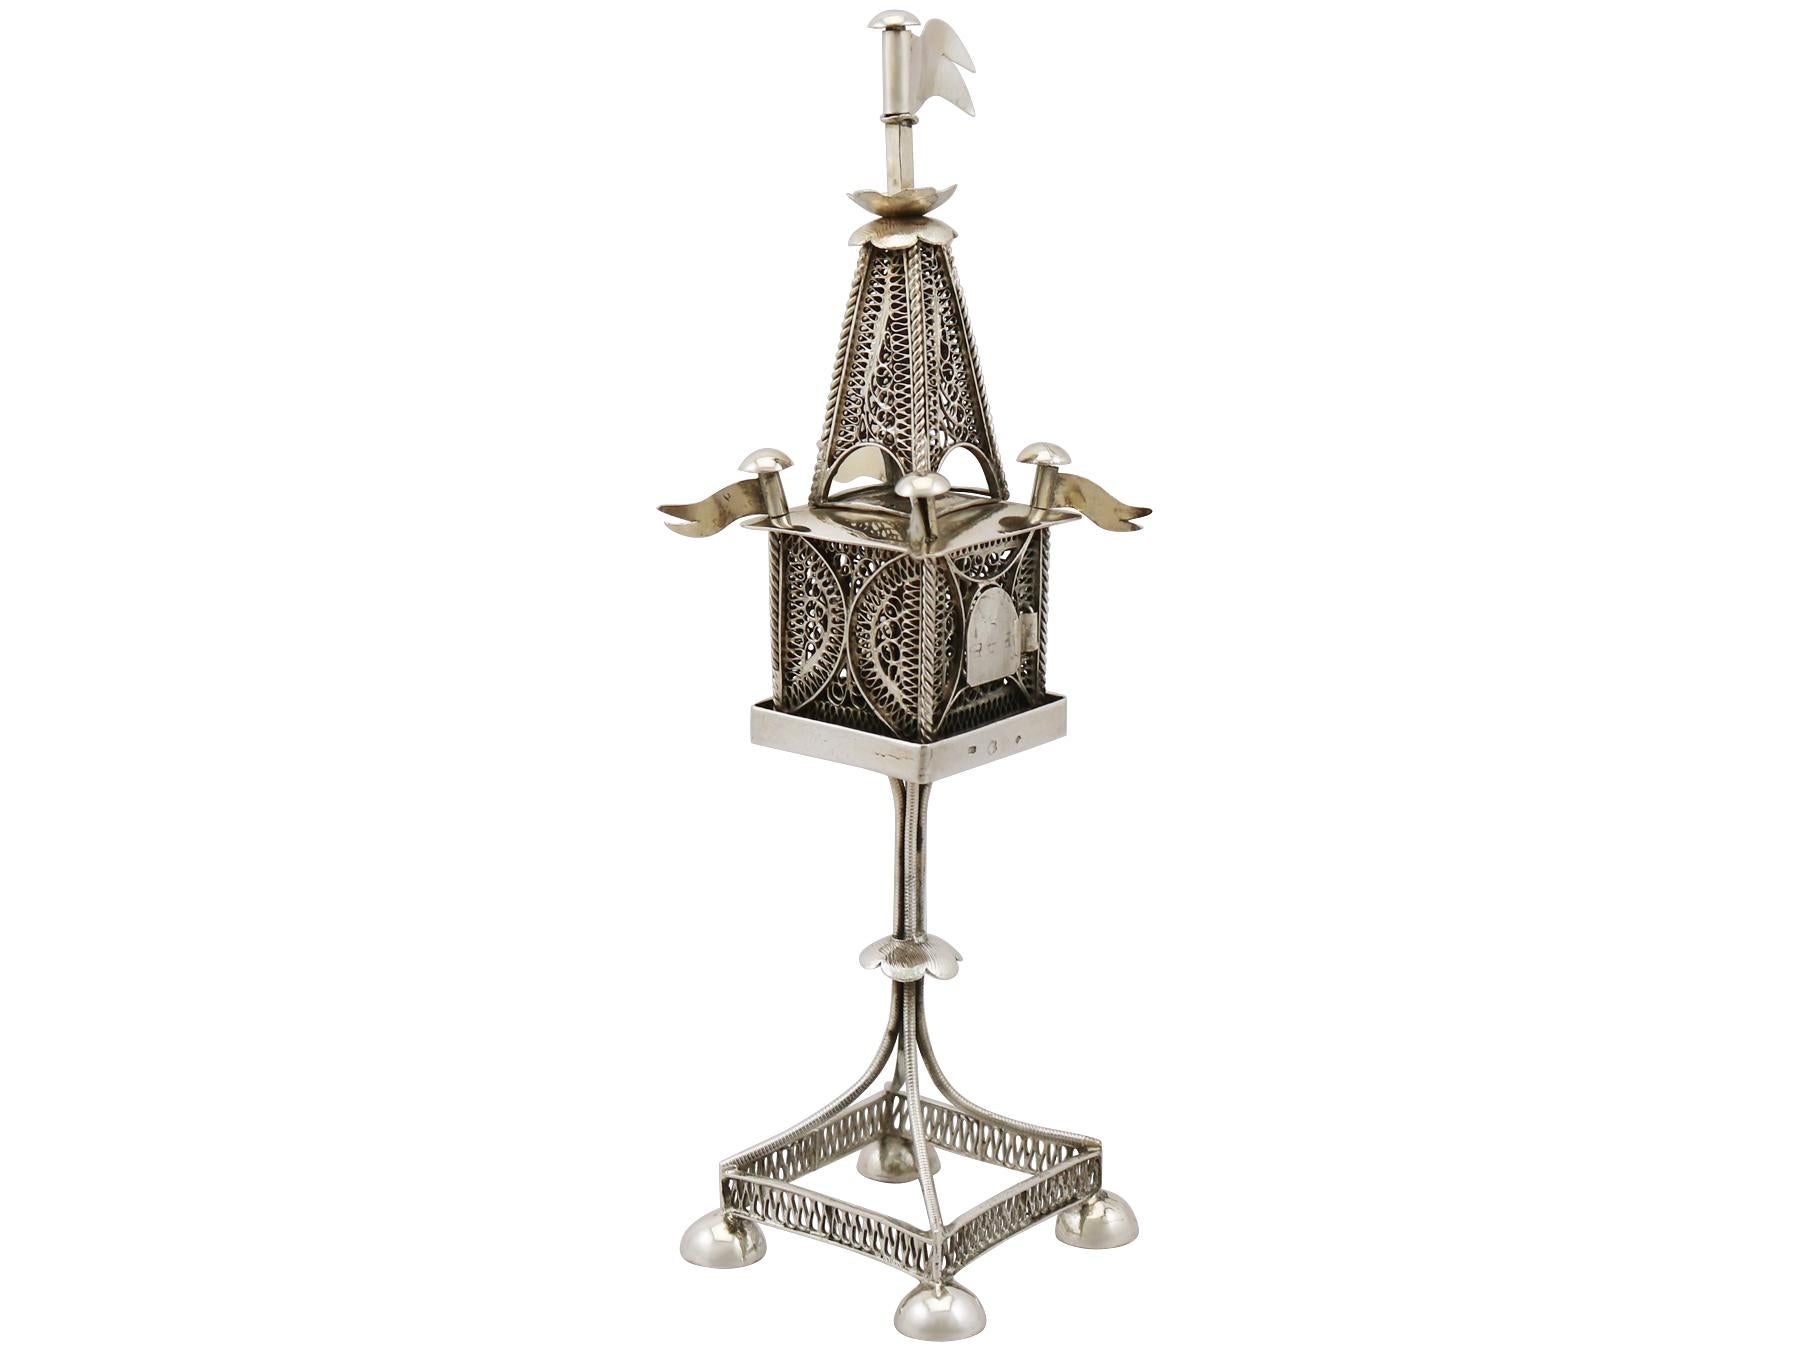 1900s Antique Austro-Hungarian Silver Spice Tower In Excellent Condition For Sale In Jesmond, Newcastle Upon Tyne